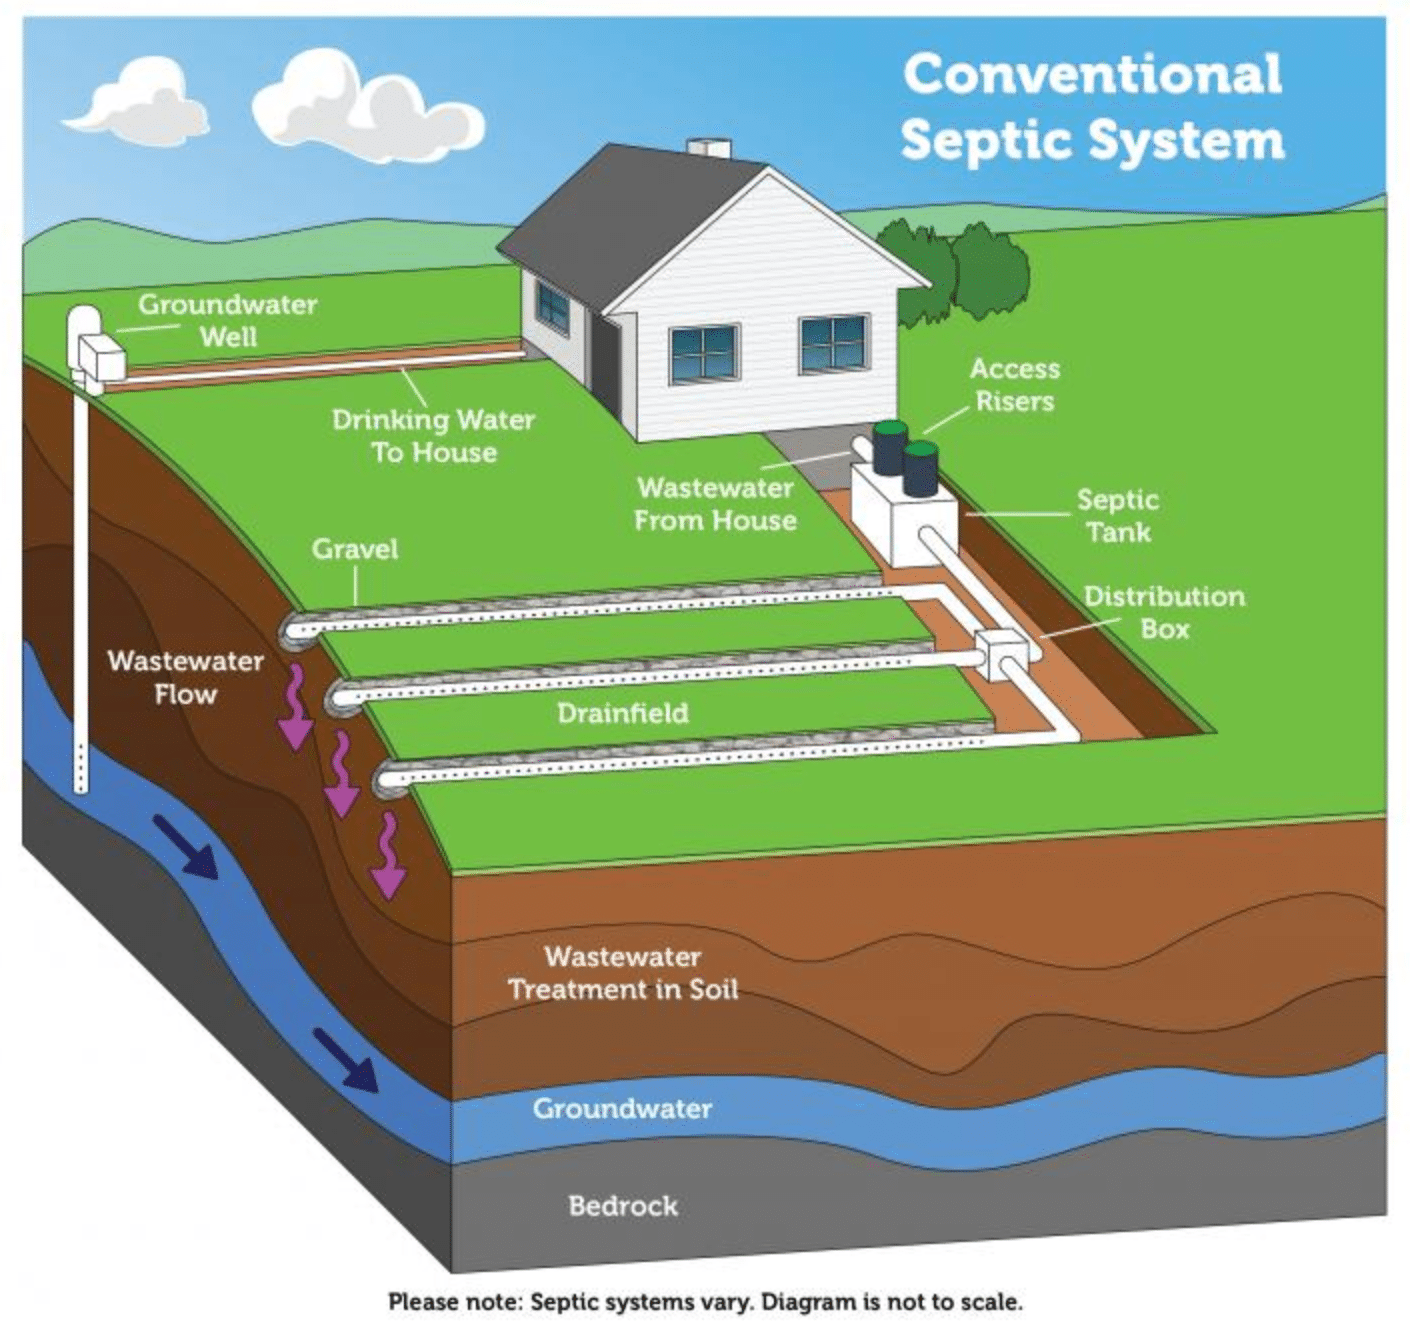 Can I Use A Septic System For A Property With Rocky Terrain?